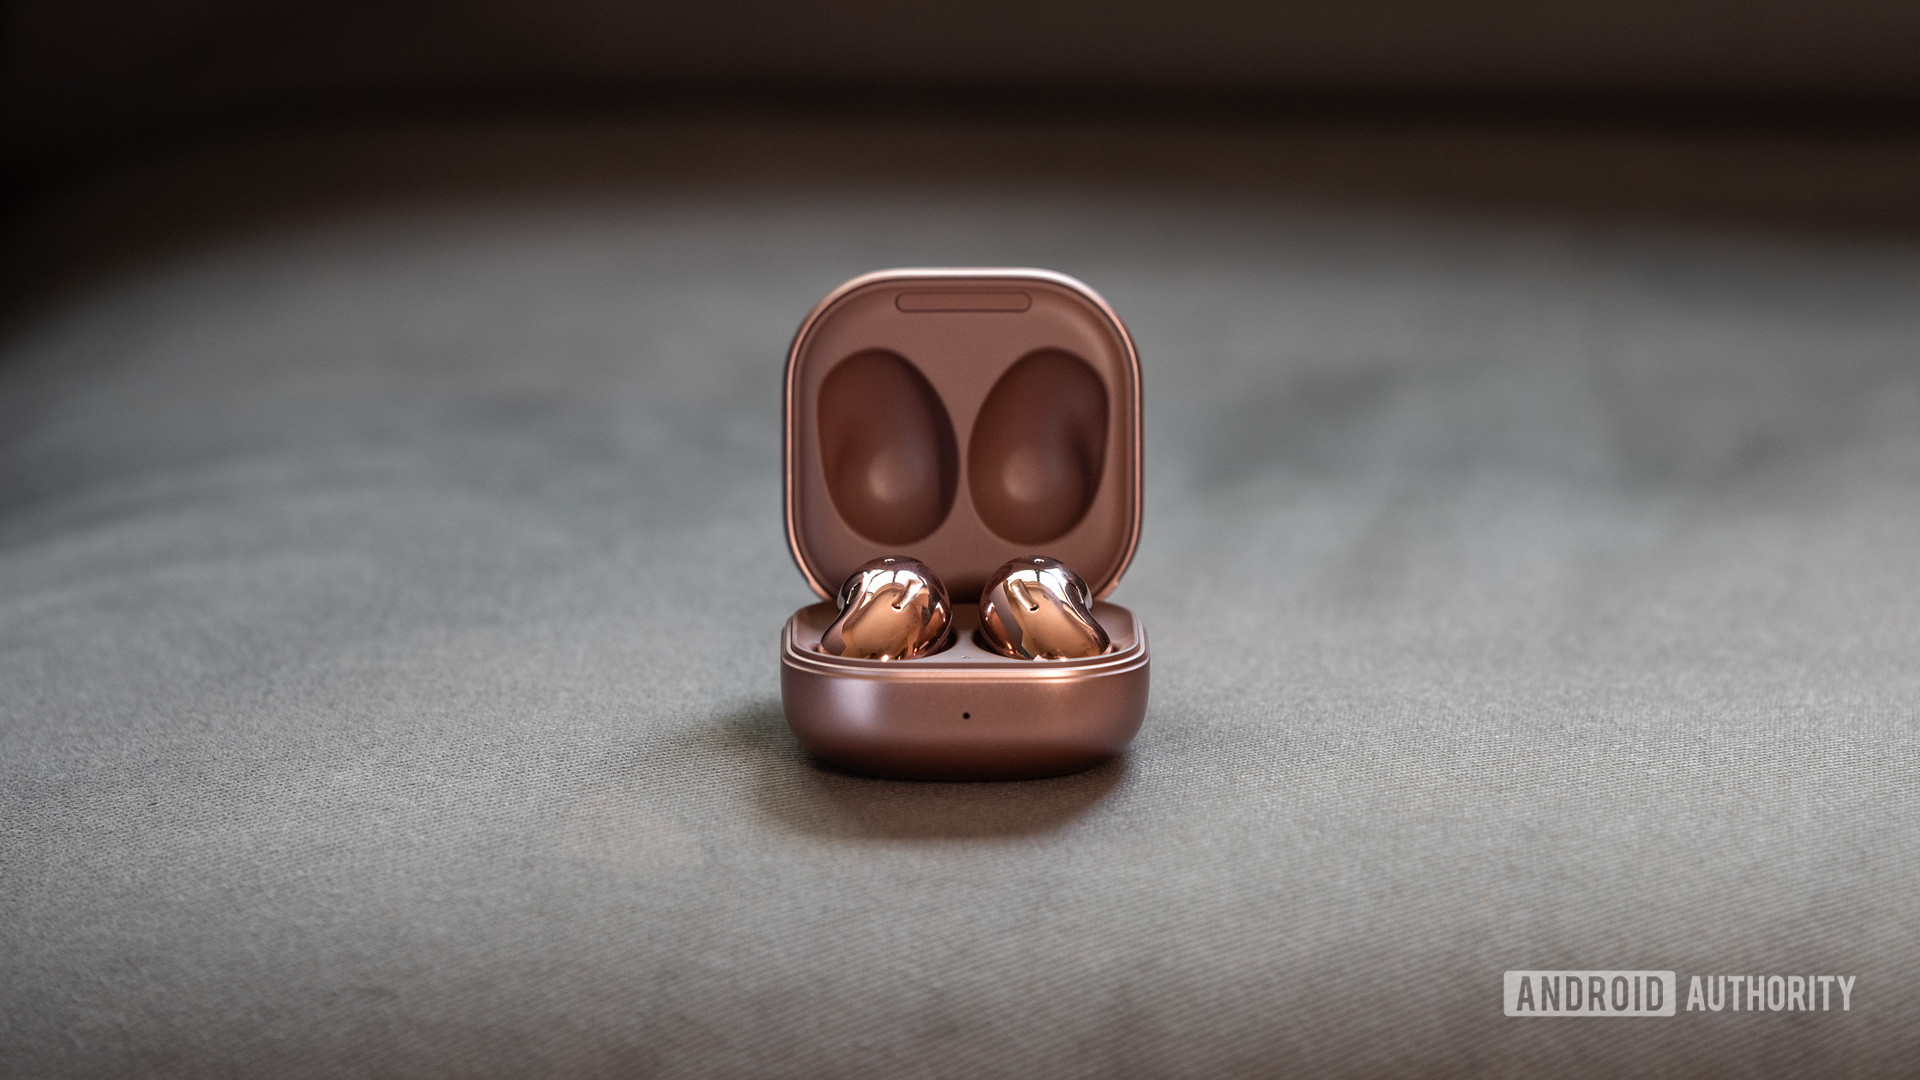 A picture of the Samsung Galaxy Buds Live noise cancelling true wireless earbuds in the case against a gray background.